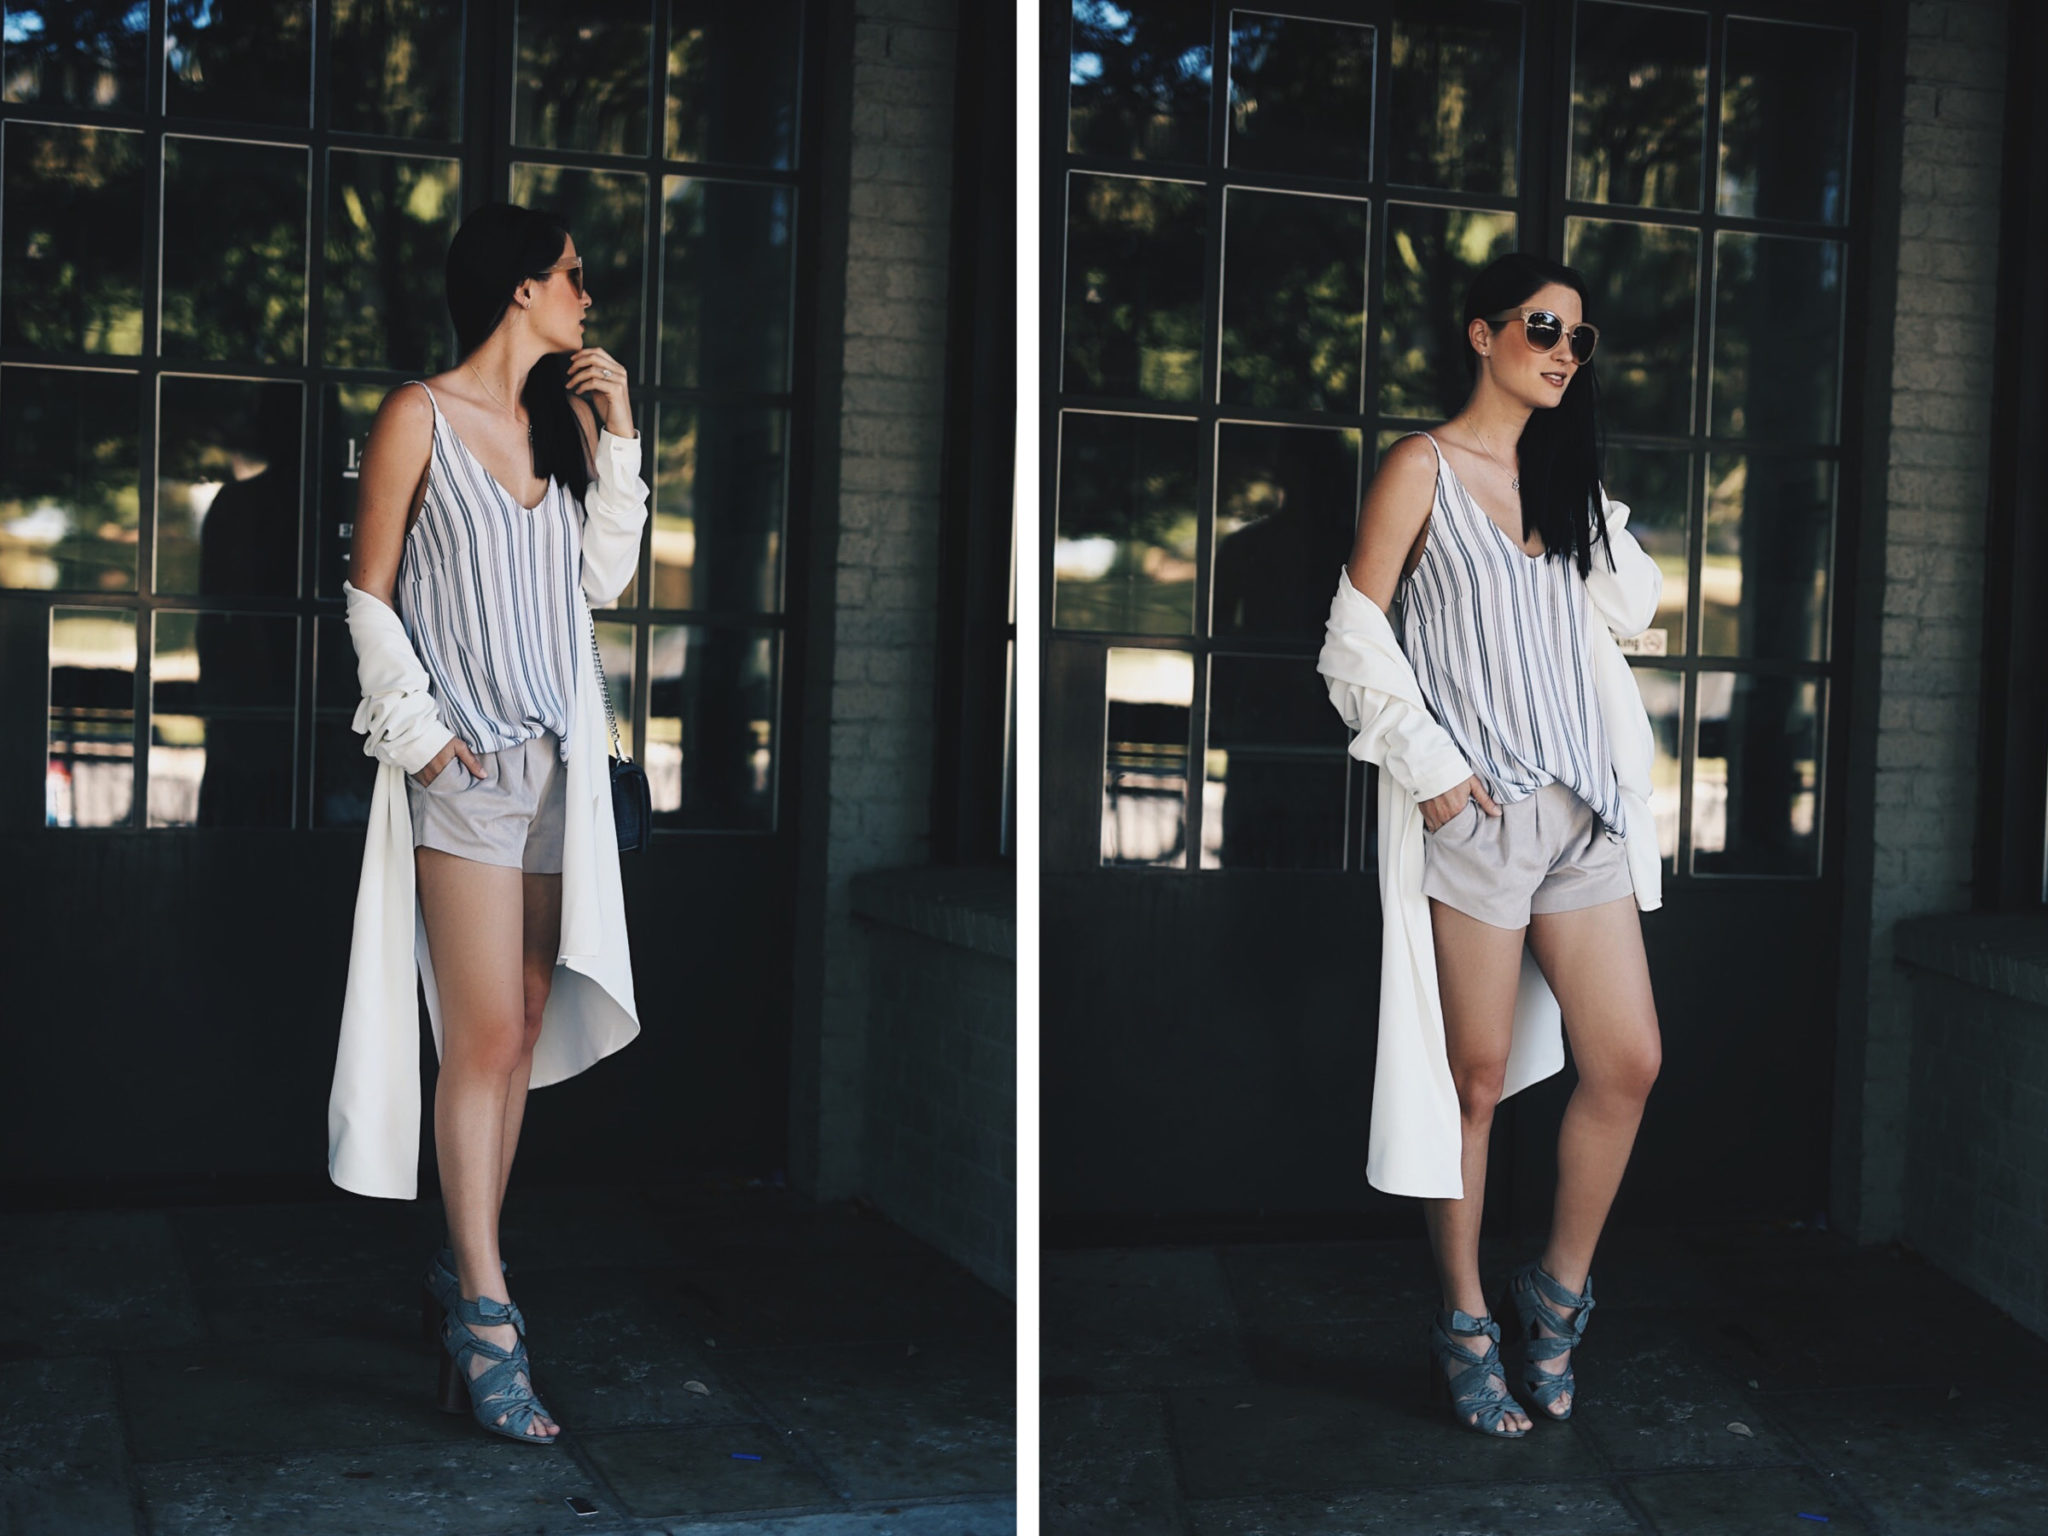 DTKAustin shares her three favorite outfits for Spring with Gentle Fawn. Maxi dresses, dusters, and summer whites are on my Spring agenda. Click for more details!